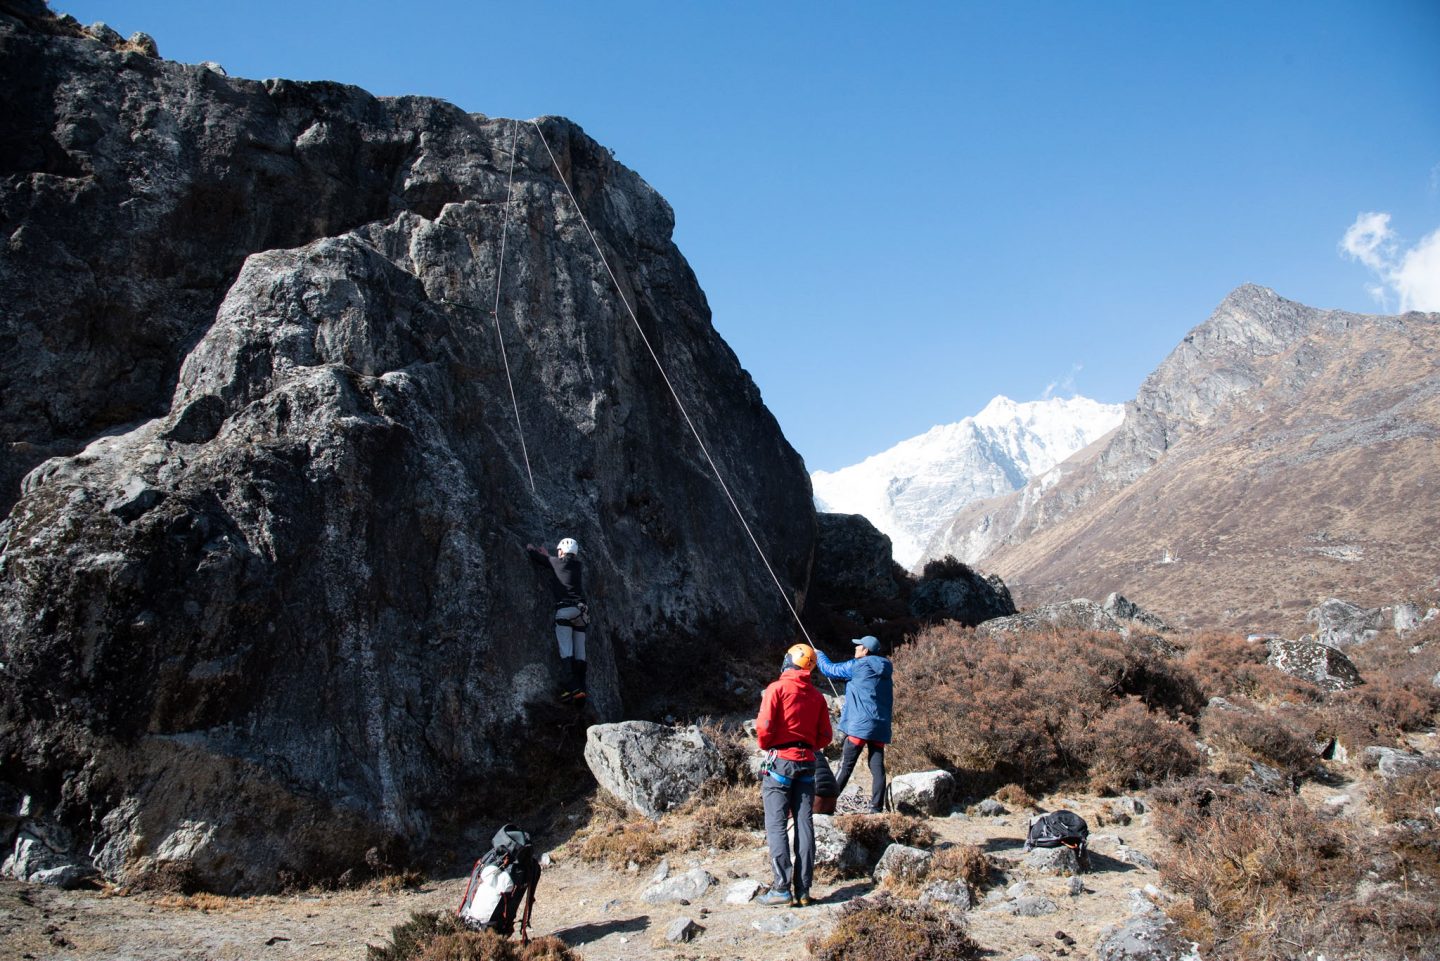 Climbing skills session in Langtang.